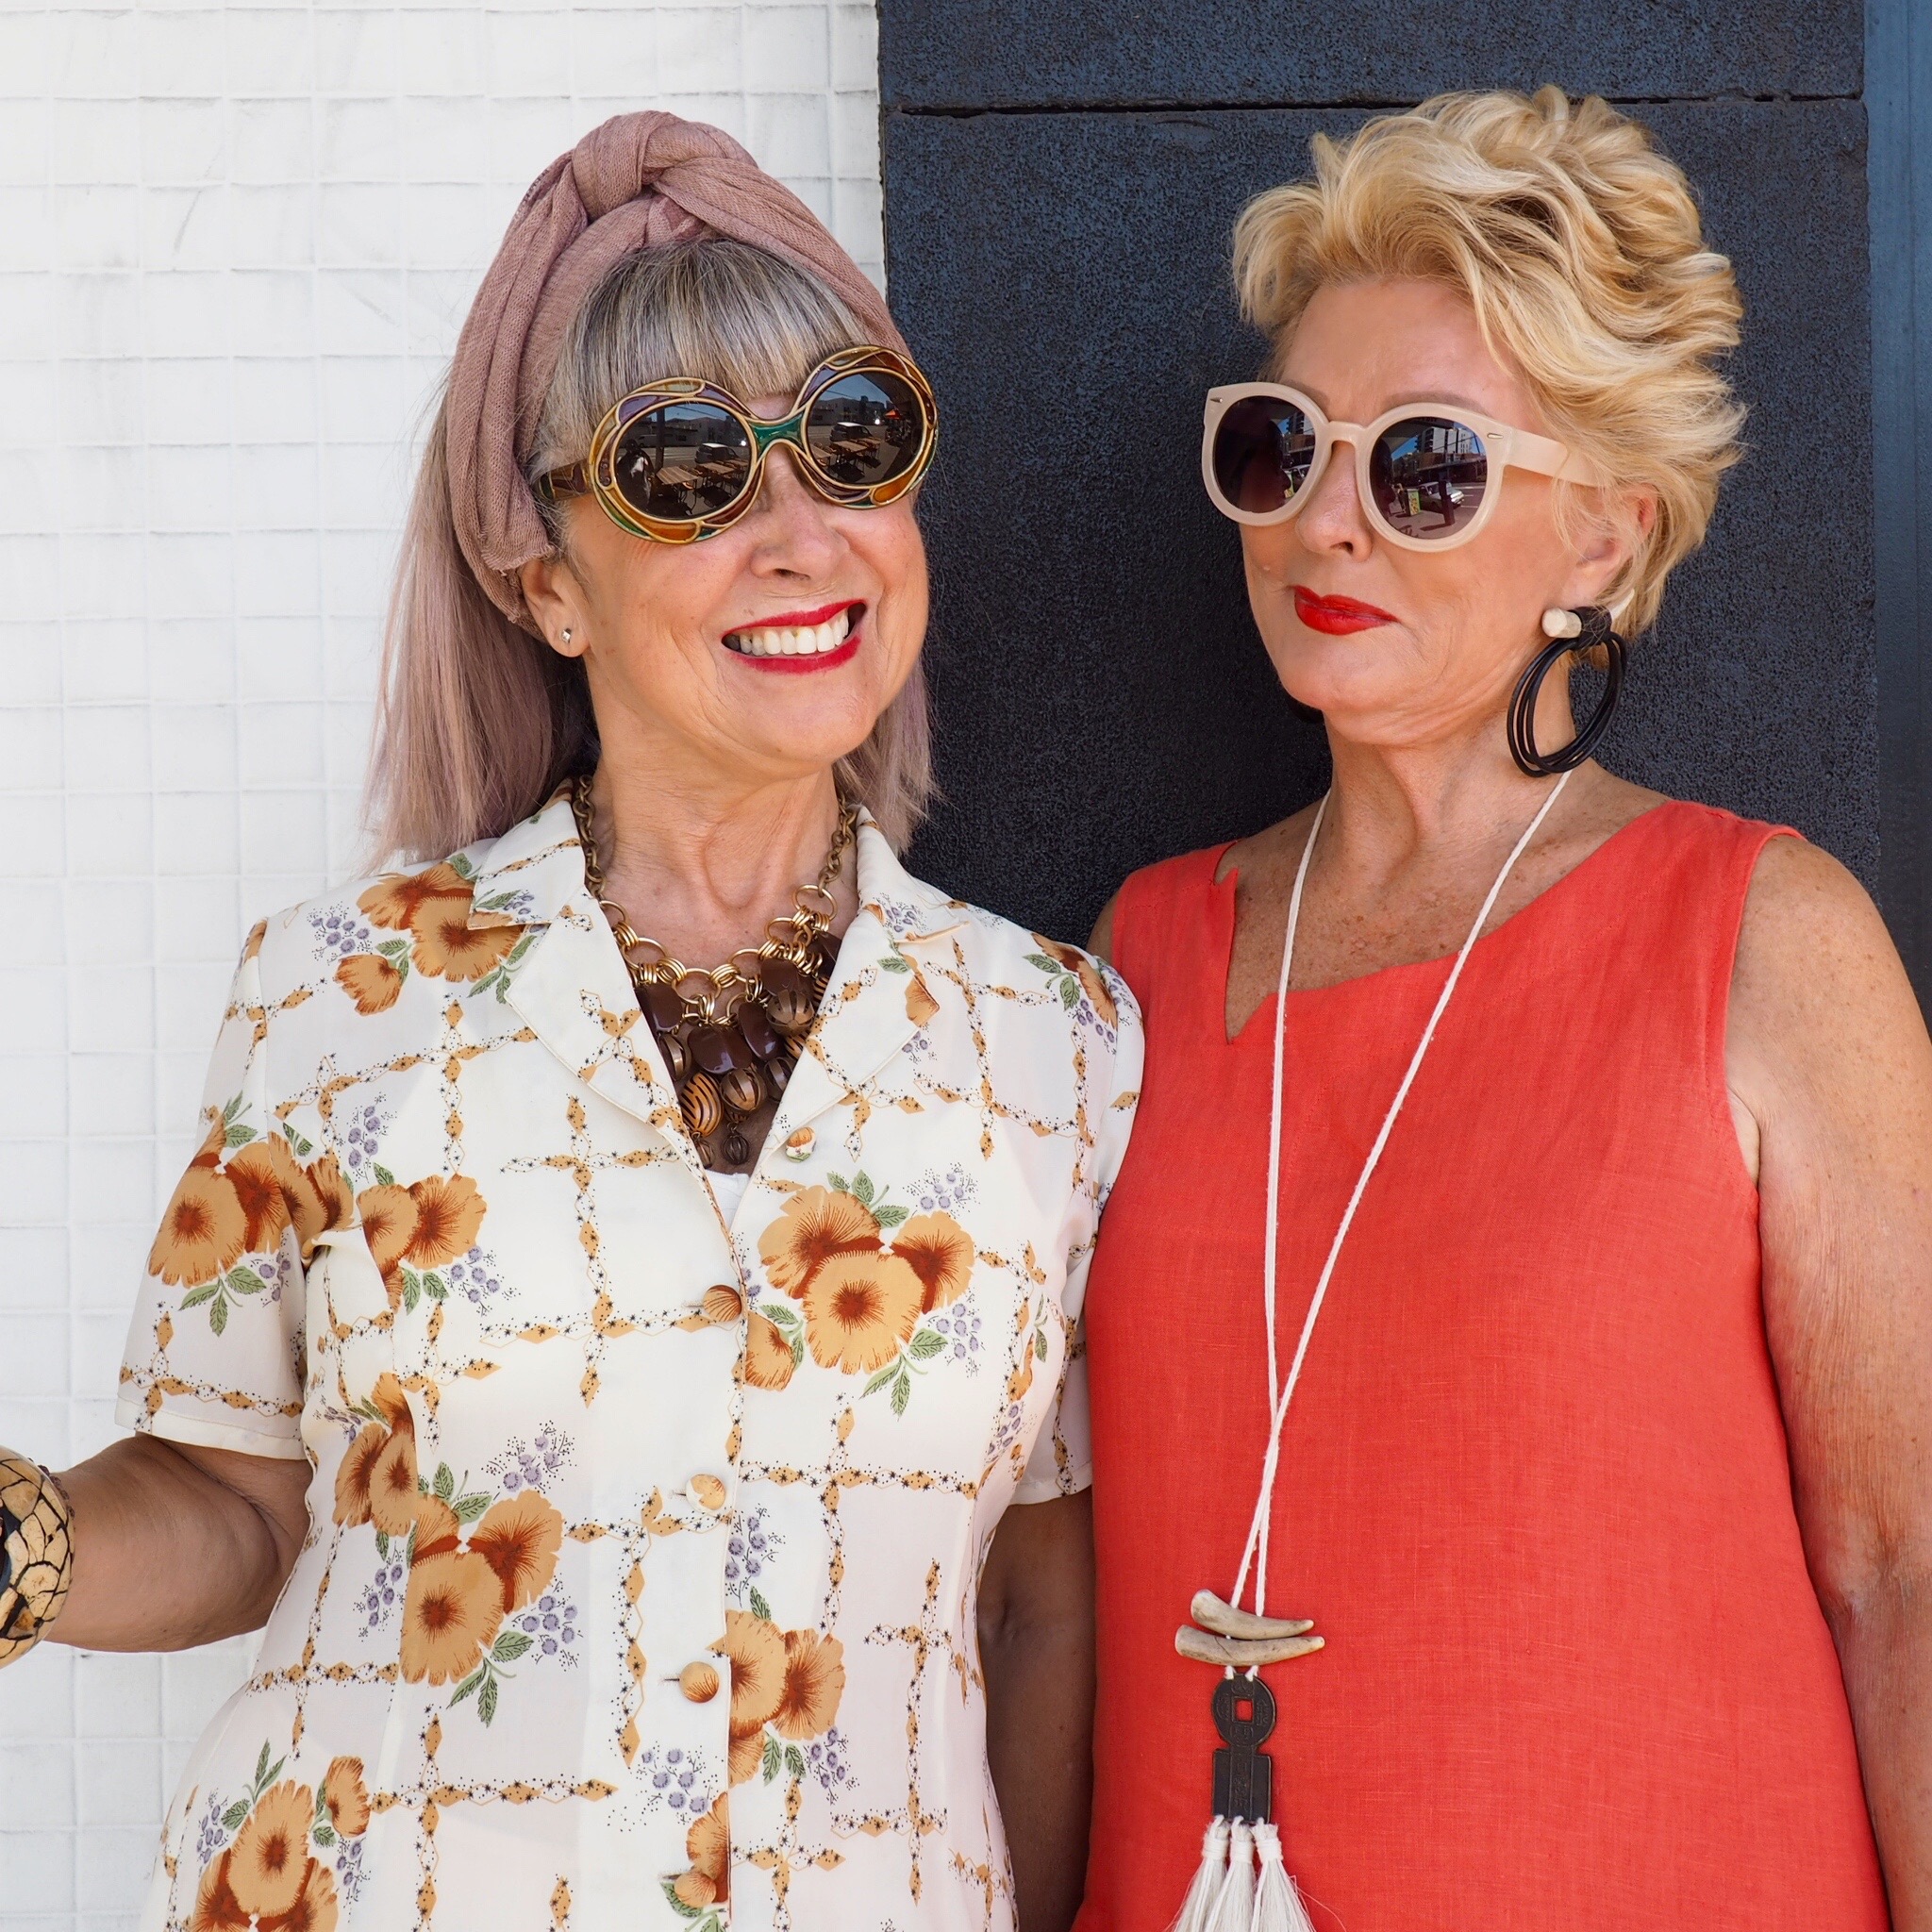 My $15 vintage dress. Vintage sunnies. With The Stylish Woman, Melbourne.